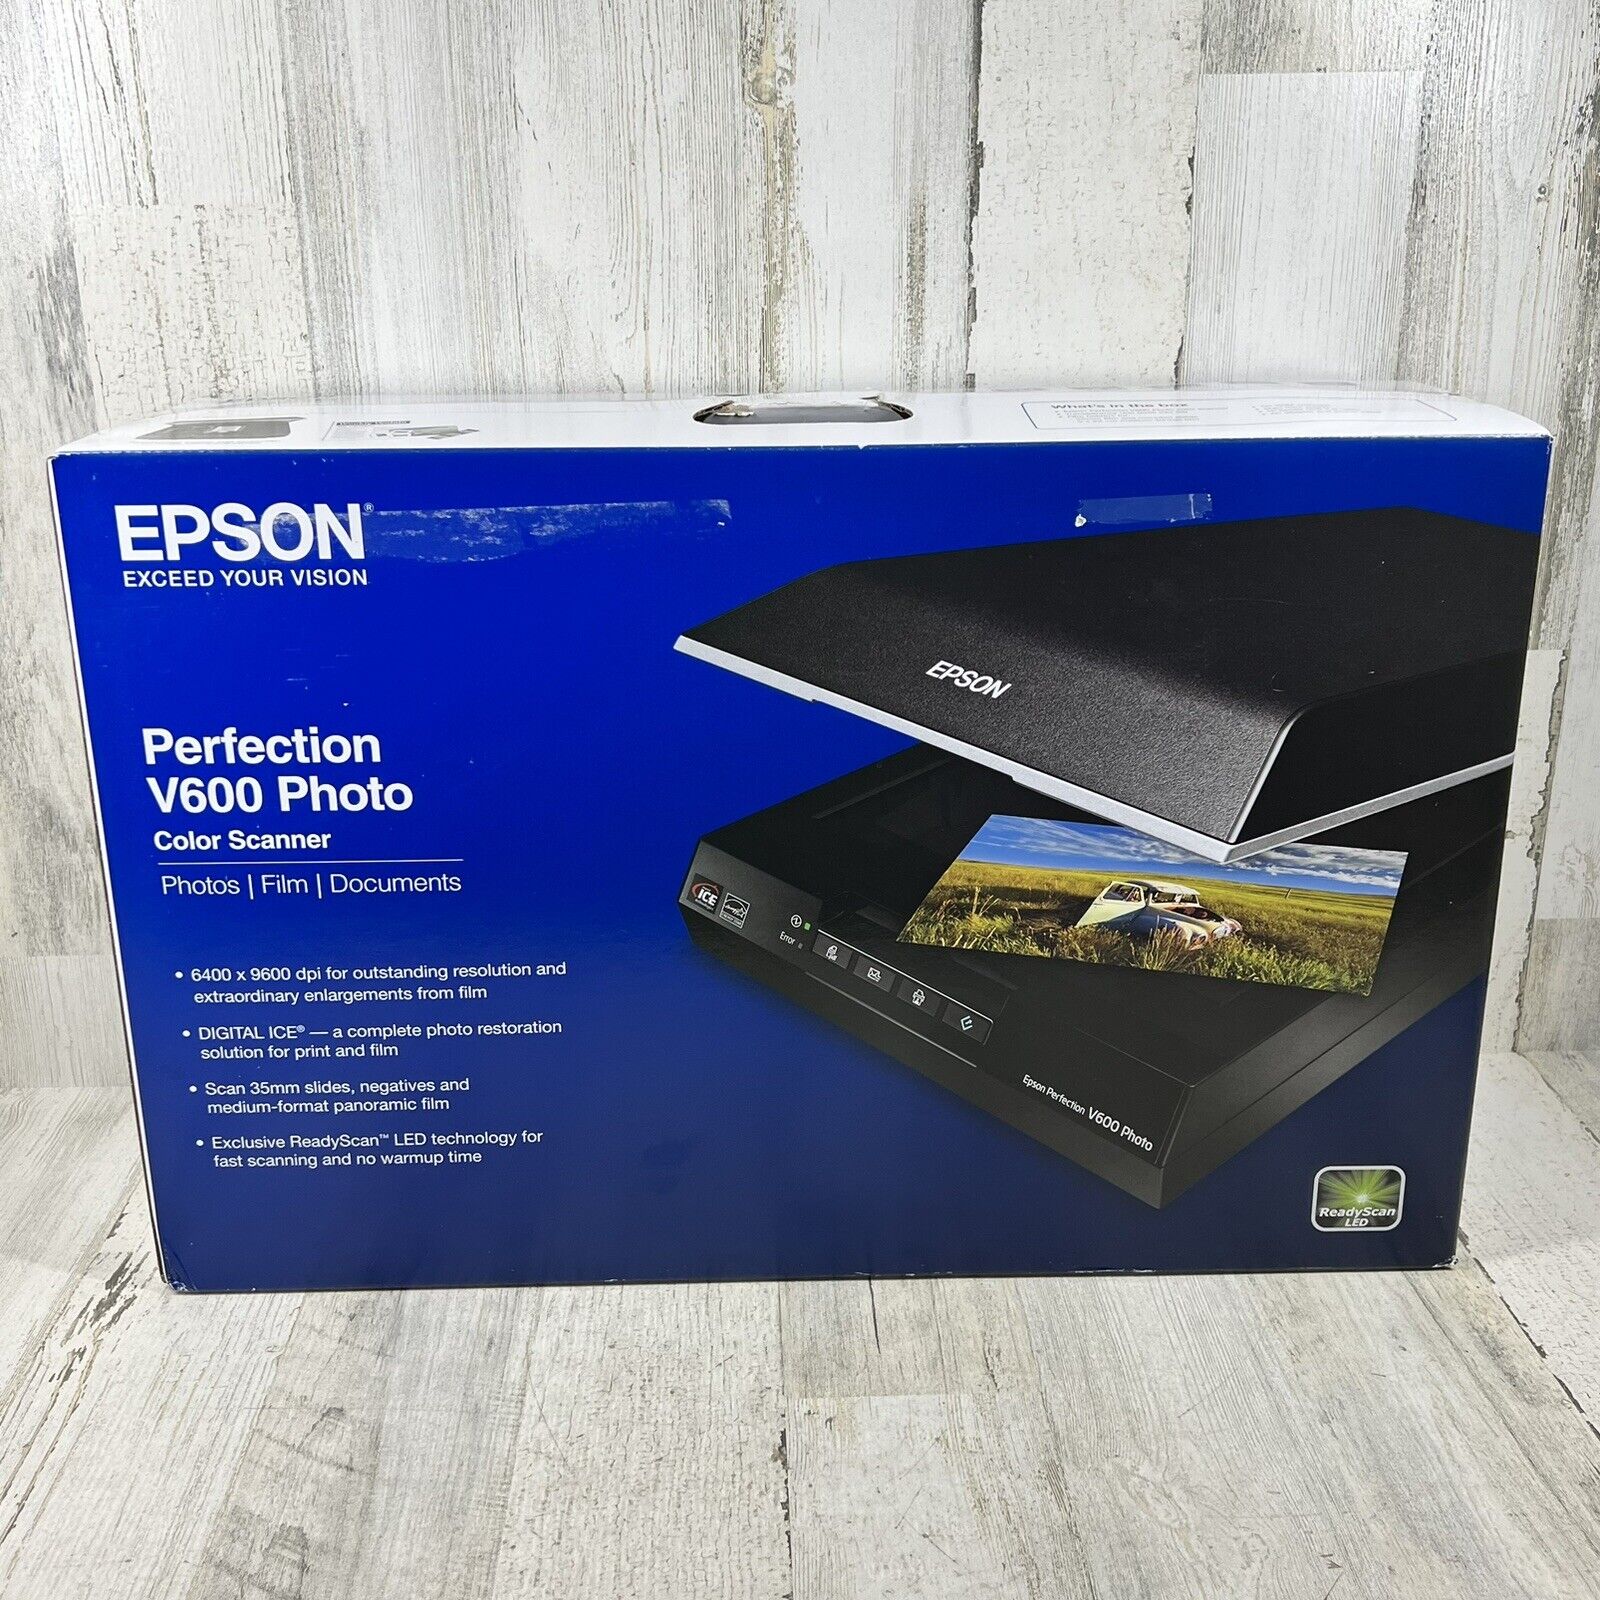 Epson Perfection V600 Photo Color Scanner - Photos/Film/Documents - New/Sealed